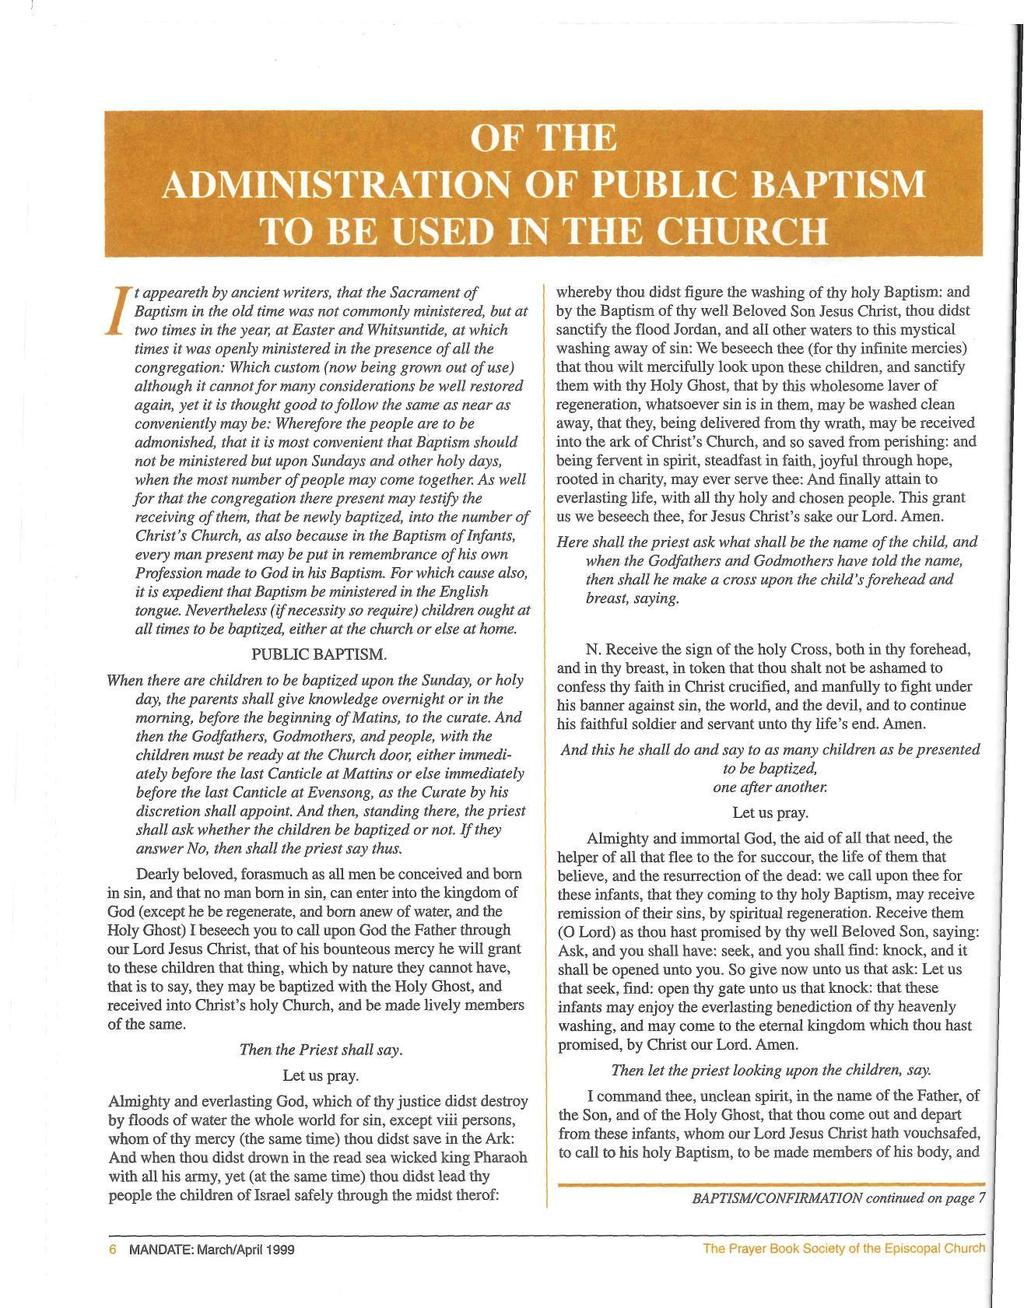 OFTHE ADMINISTRATION OF PUBLIC BAPTISM TO BE USED IN THE CHURCH / t appeareth by ancient writers, that the Sacrament of Baptism in the old time was not commonly ministered, but at two times in the